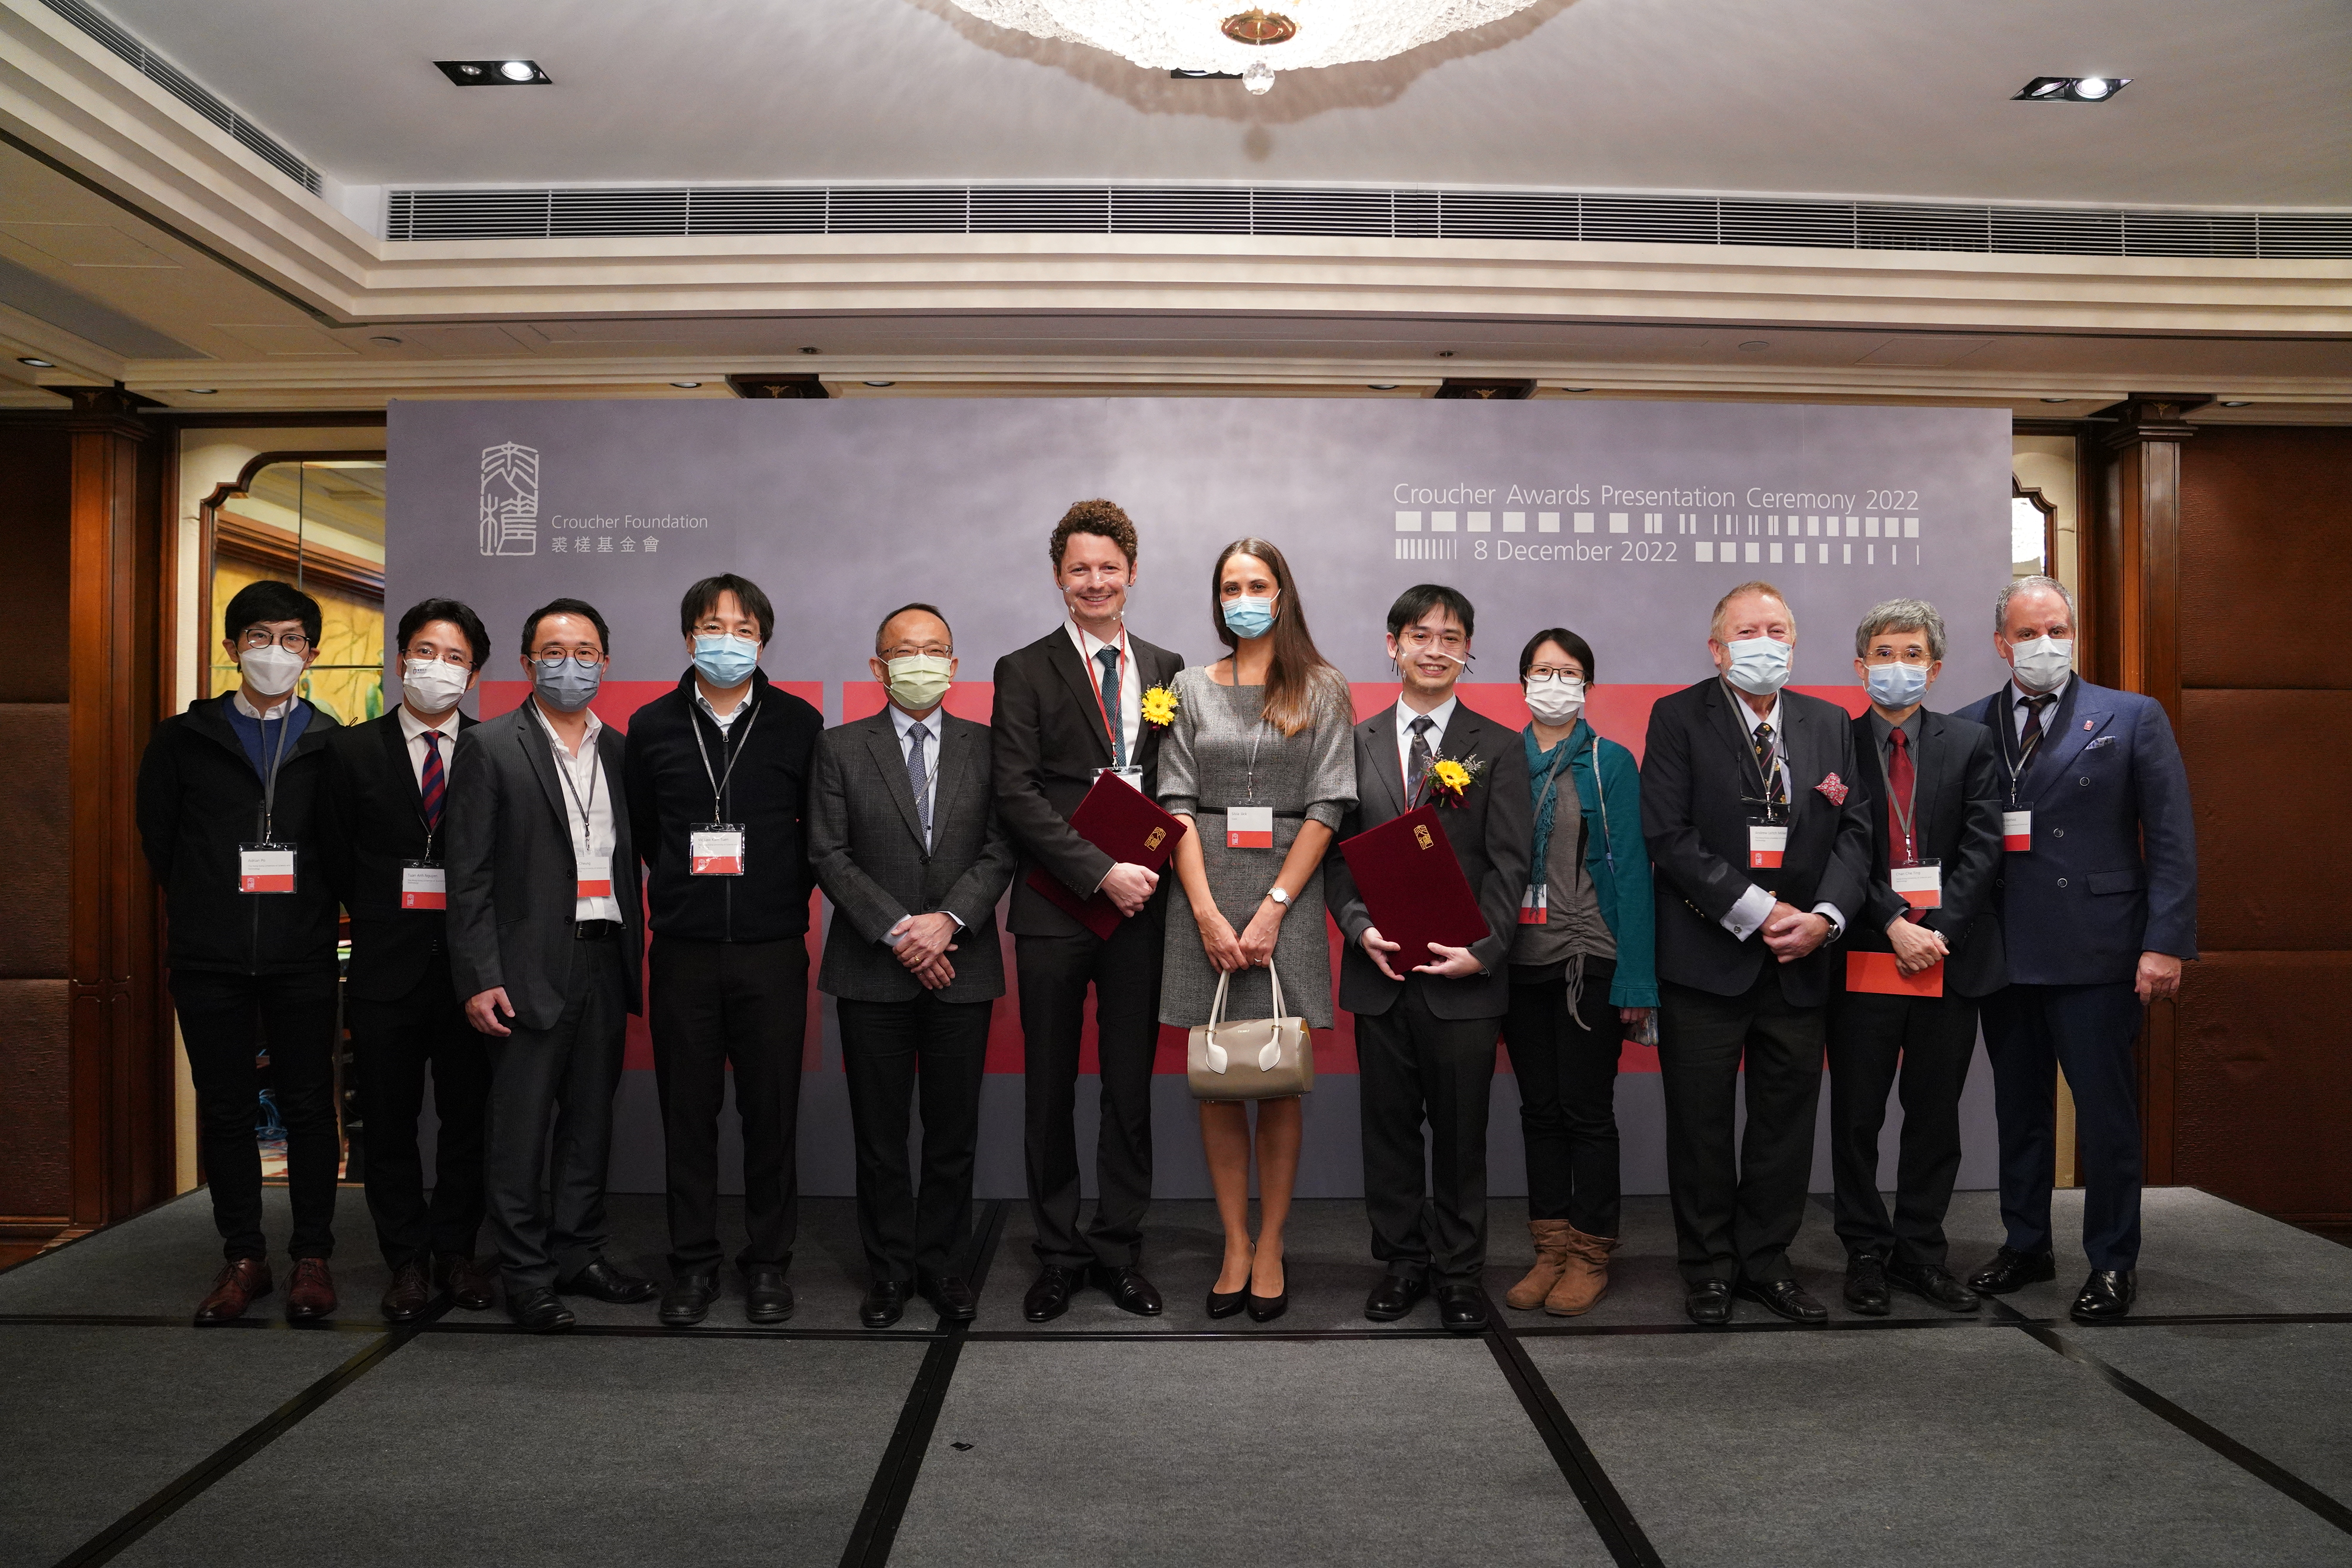 A group photo of Prof. Tim Cheng, HKUST Vice-President for Research and Development (fifth left), Prof. Jensen Li Tsan-hang (fifth right), Dr. Berthold Jäck (sixth left) and other faculty members from the Department of Physics. 